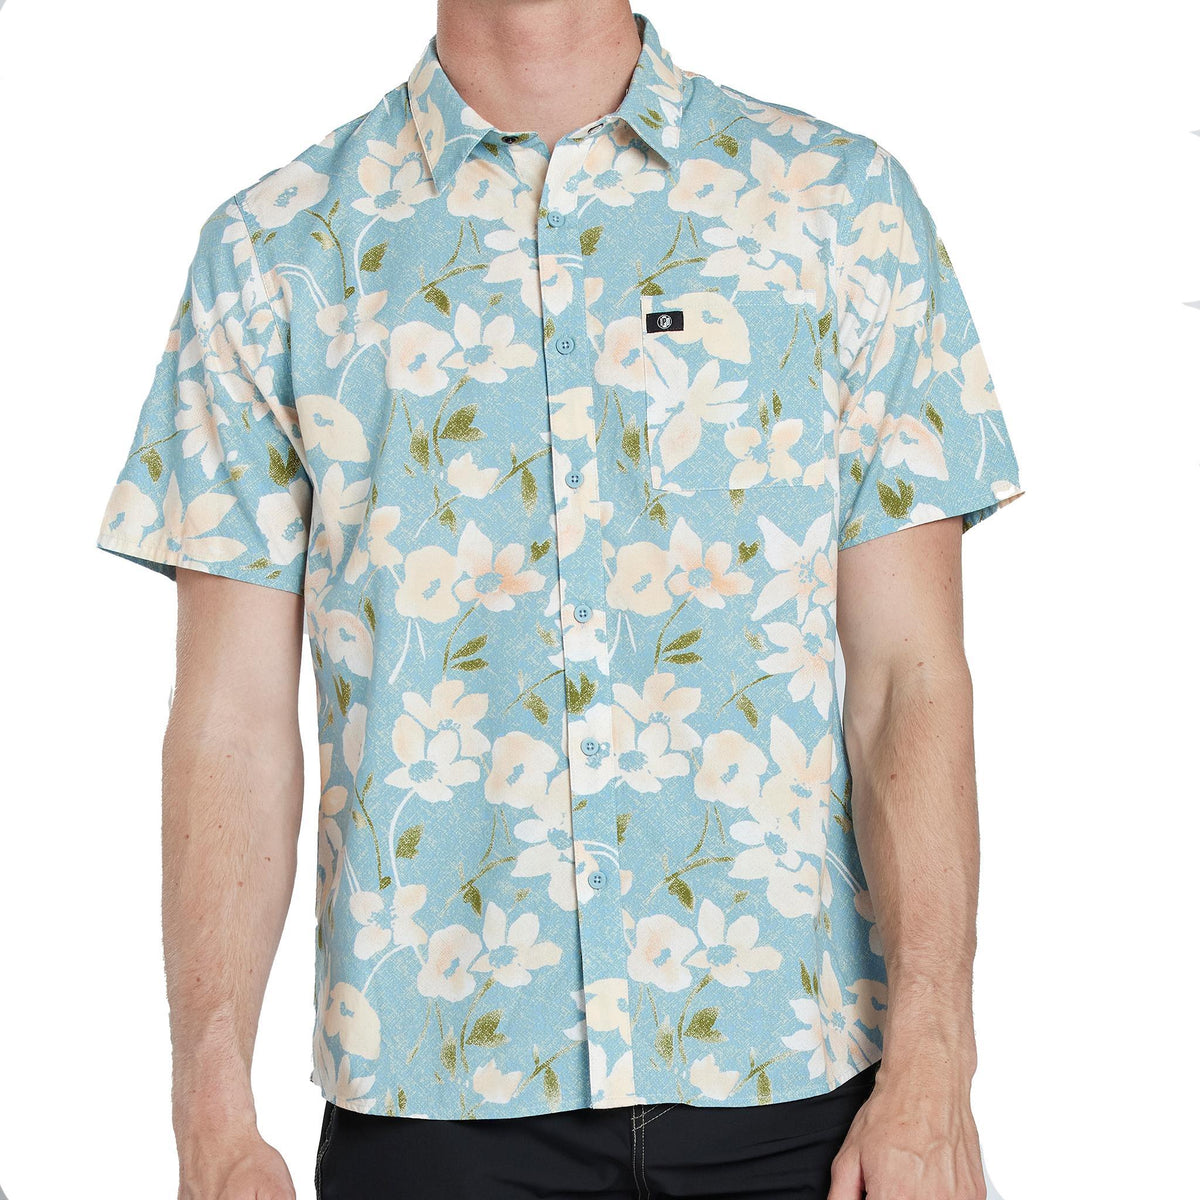 Front view of a men&#39;s short sleeve floral button-down shirt in light blue. The shirt features a vibrant floral pattern in shades of white and pink against a light blue background.